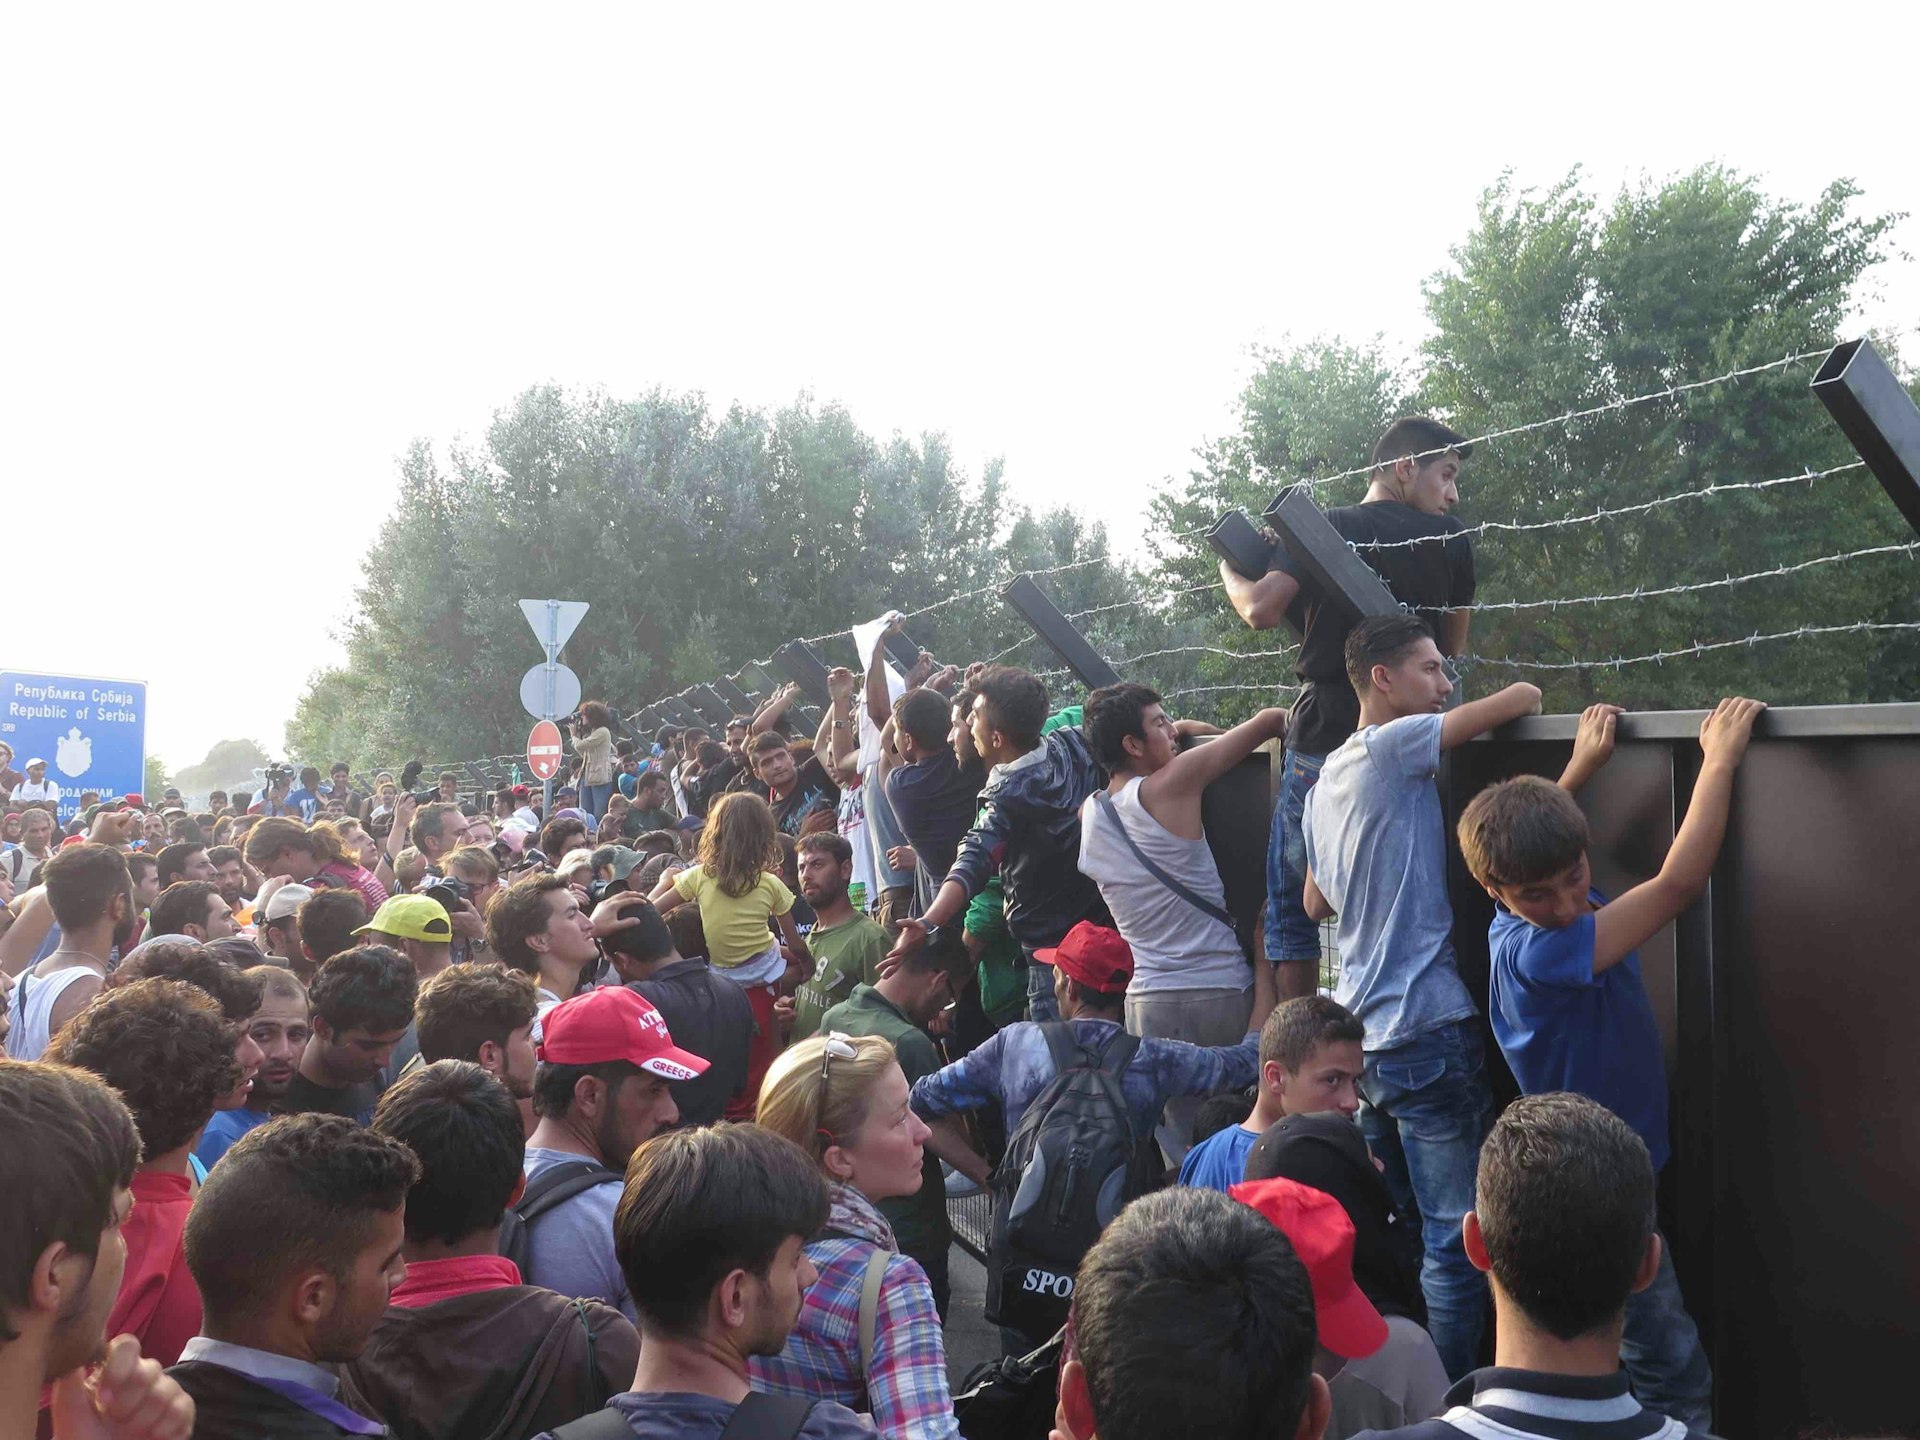 To defeat ISIS, we must solve the refugee crisis